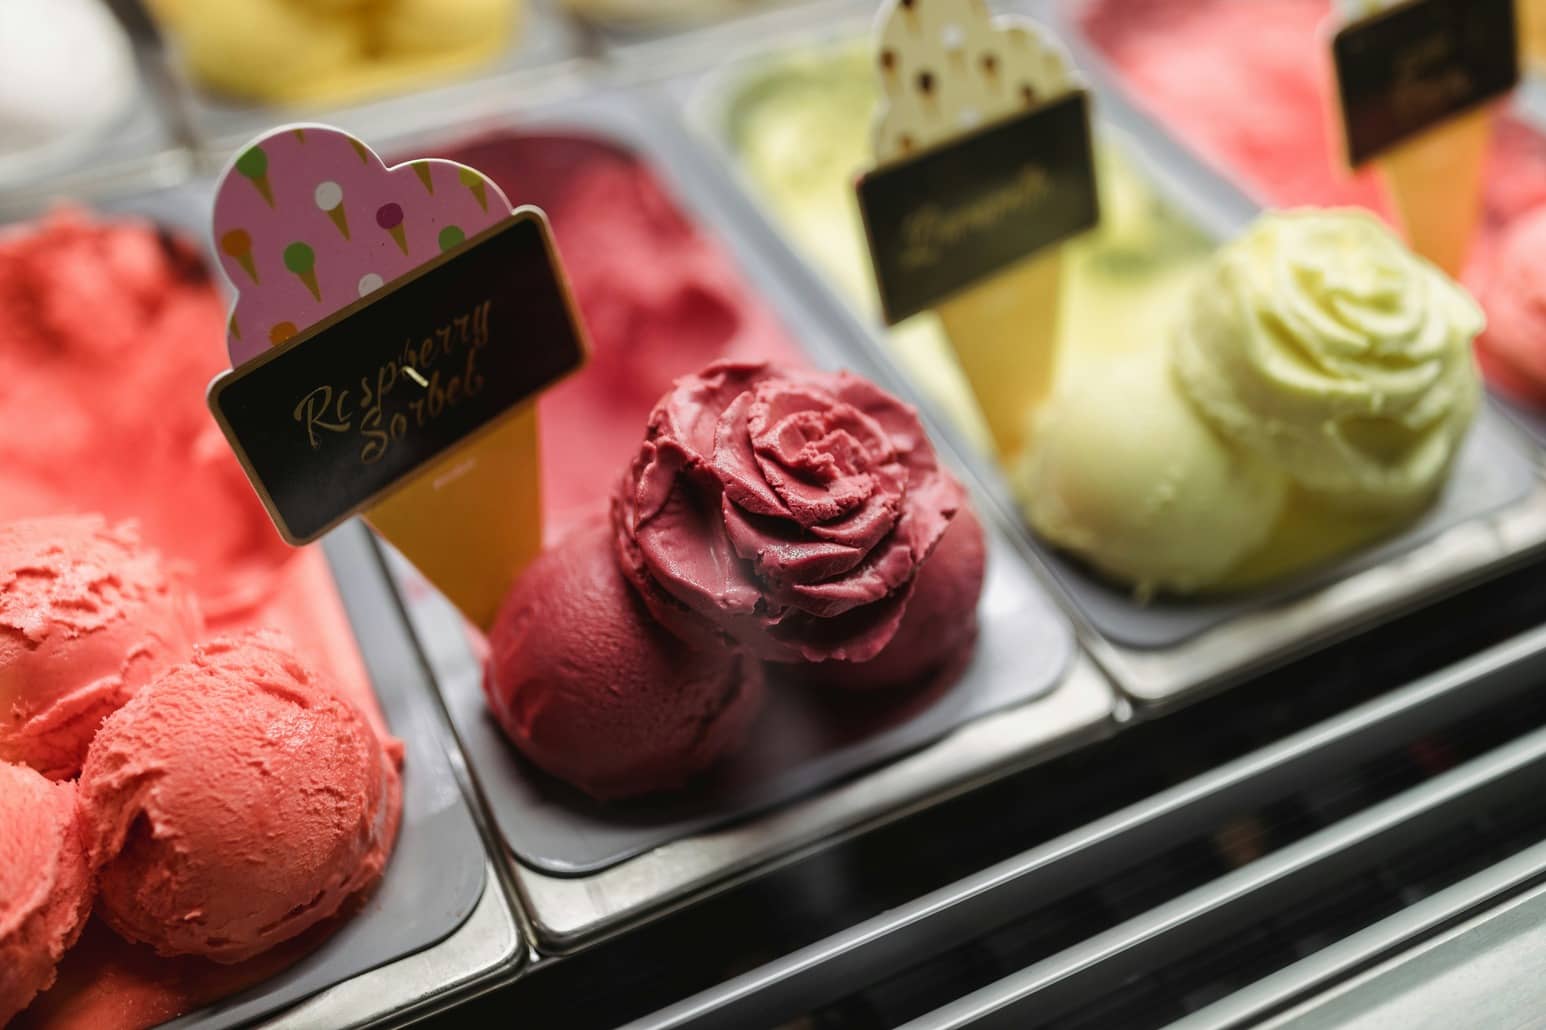 A variety of gelato, ice cream, and sorbet flavors